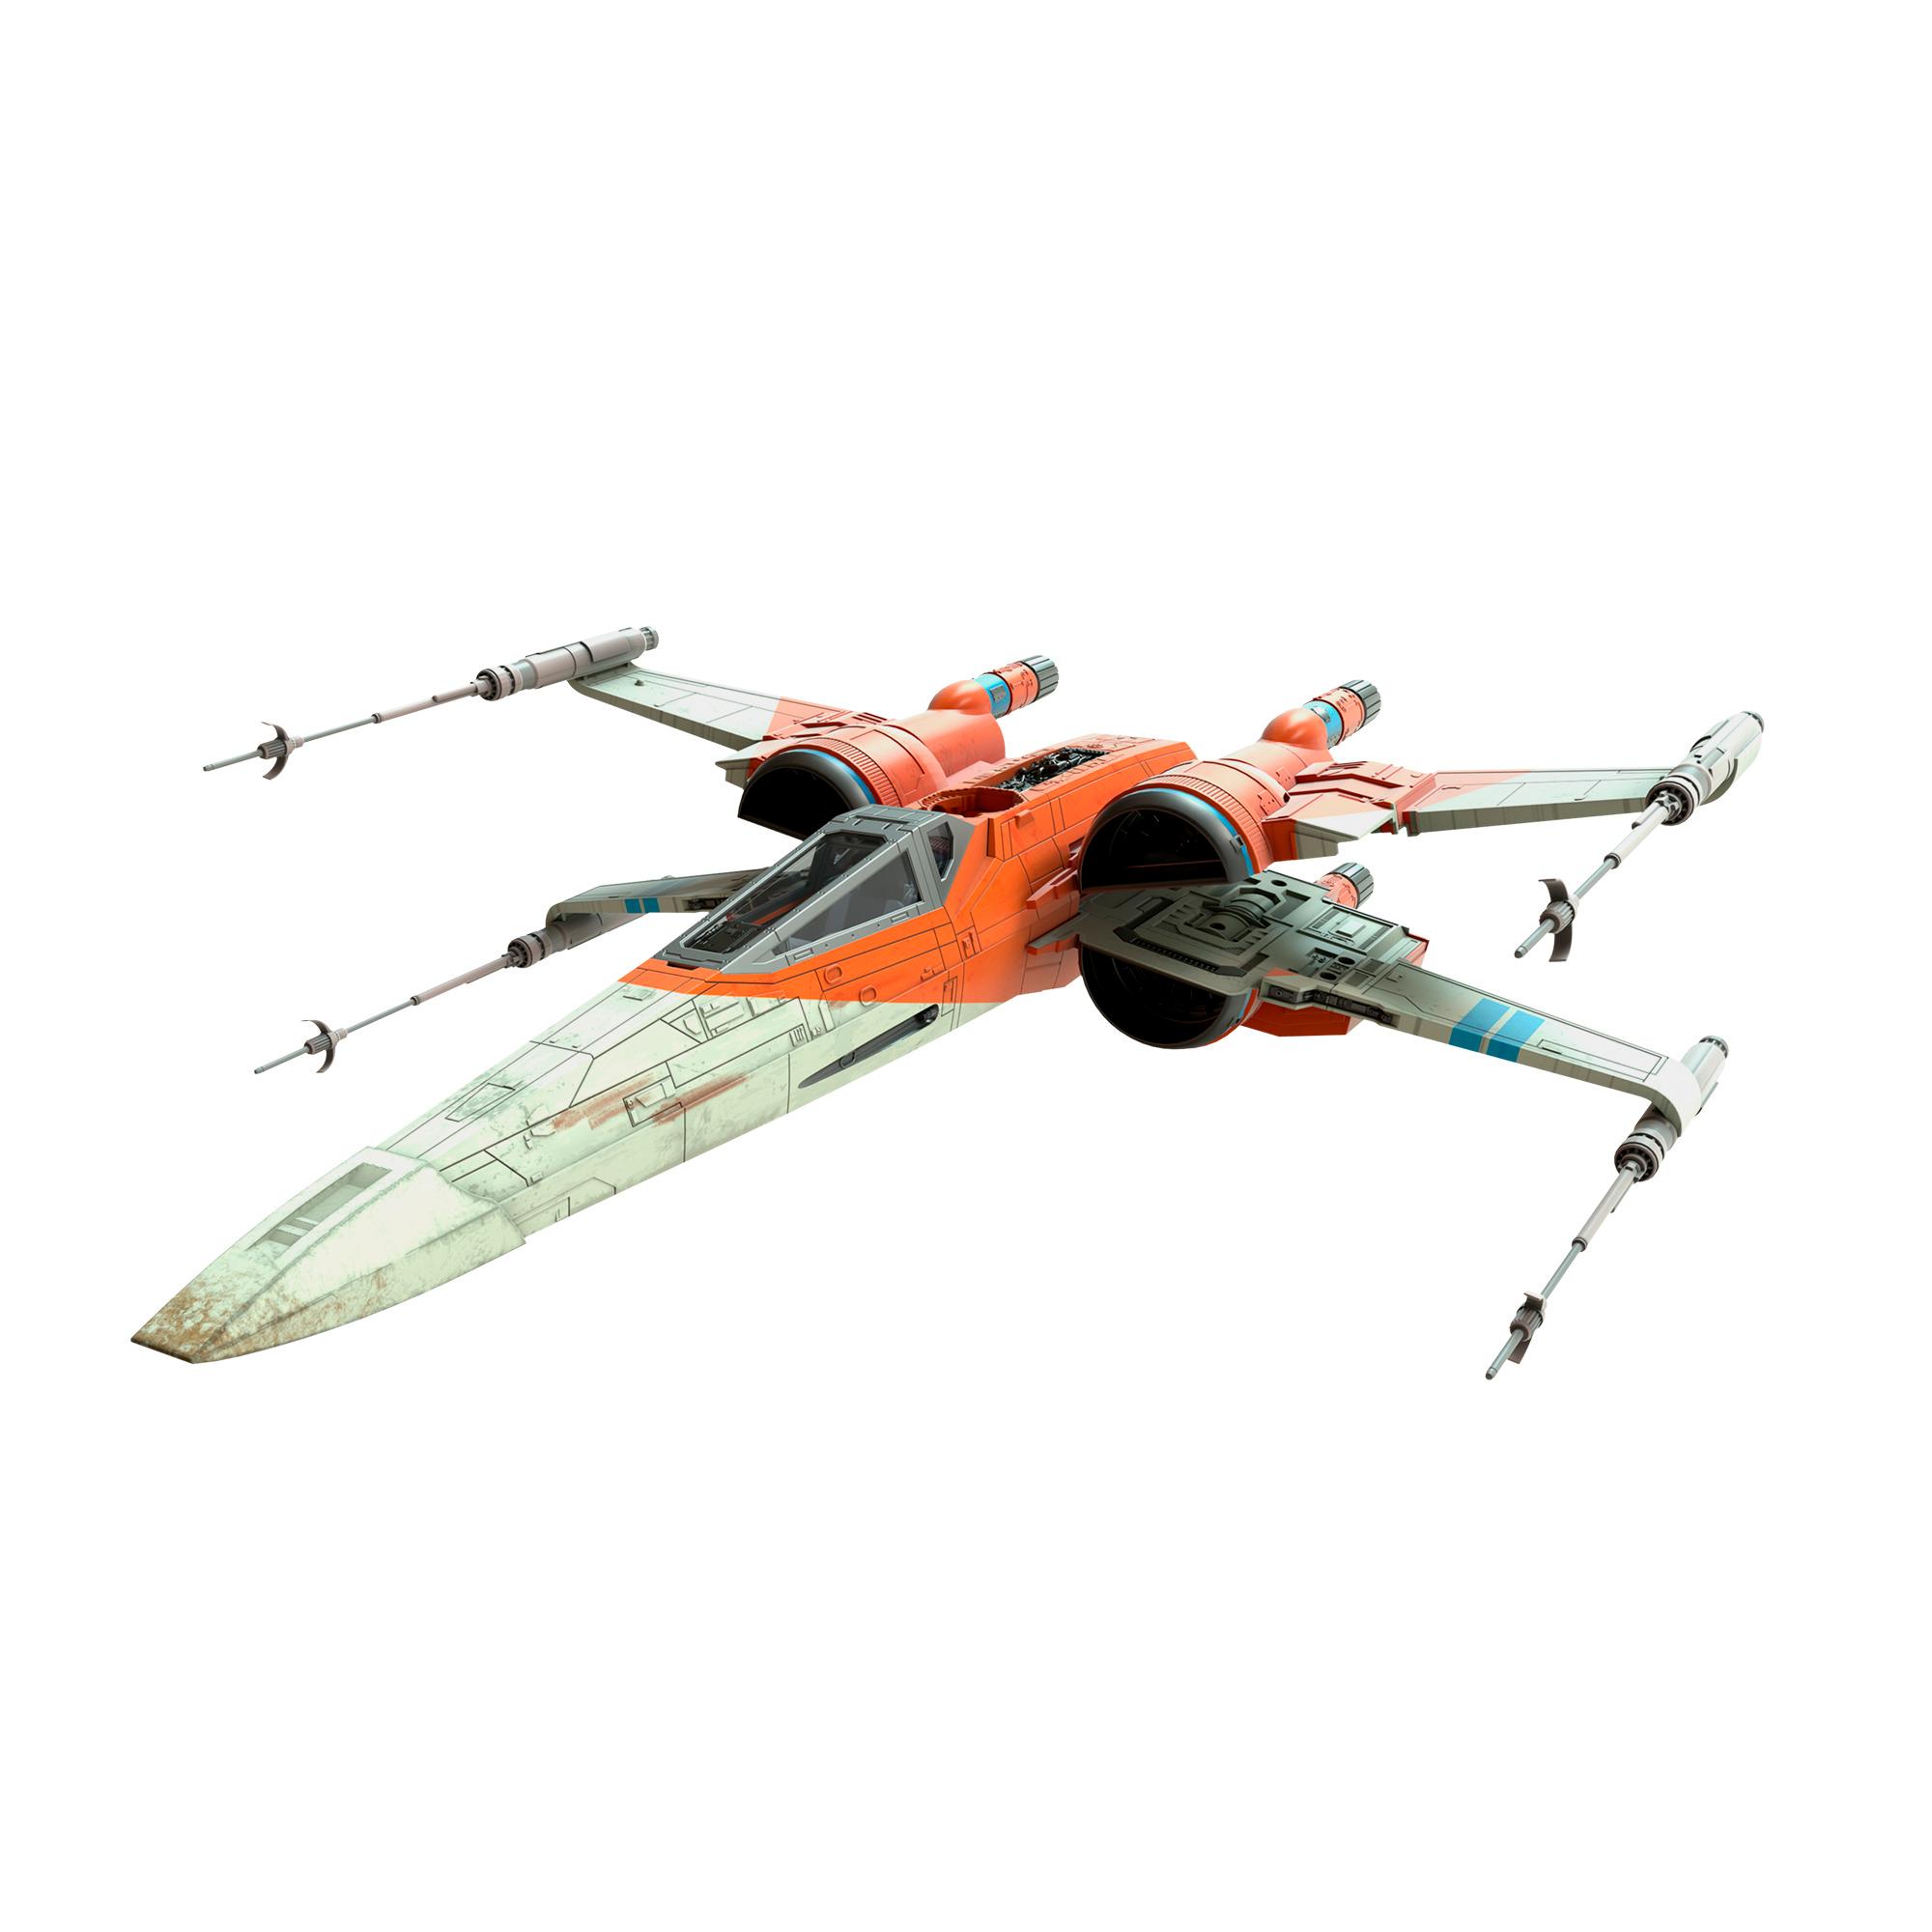 Star Wars The Rise of Skywalker Vintage Collection Poe Dameron’s X-Wing Fighter 